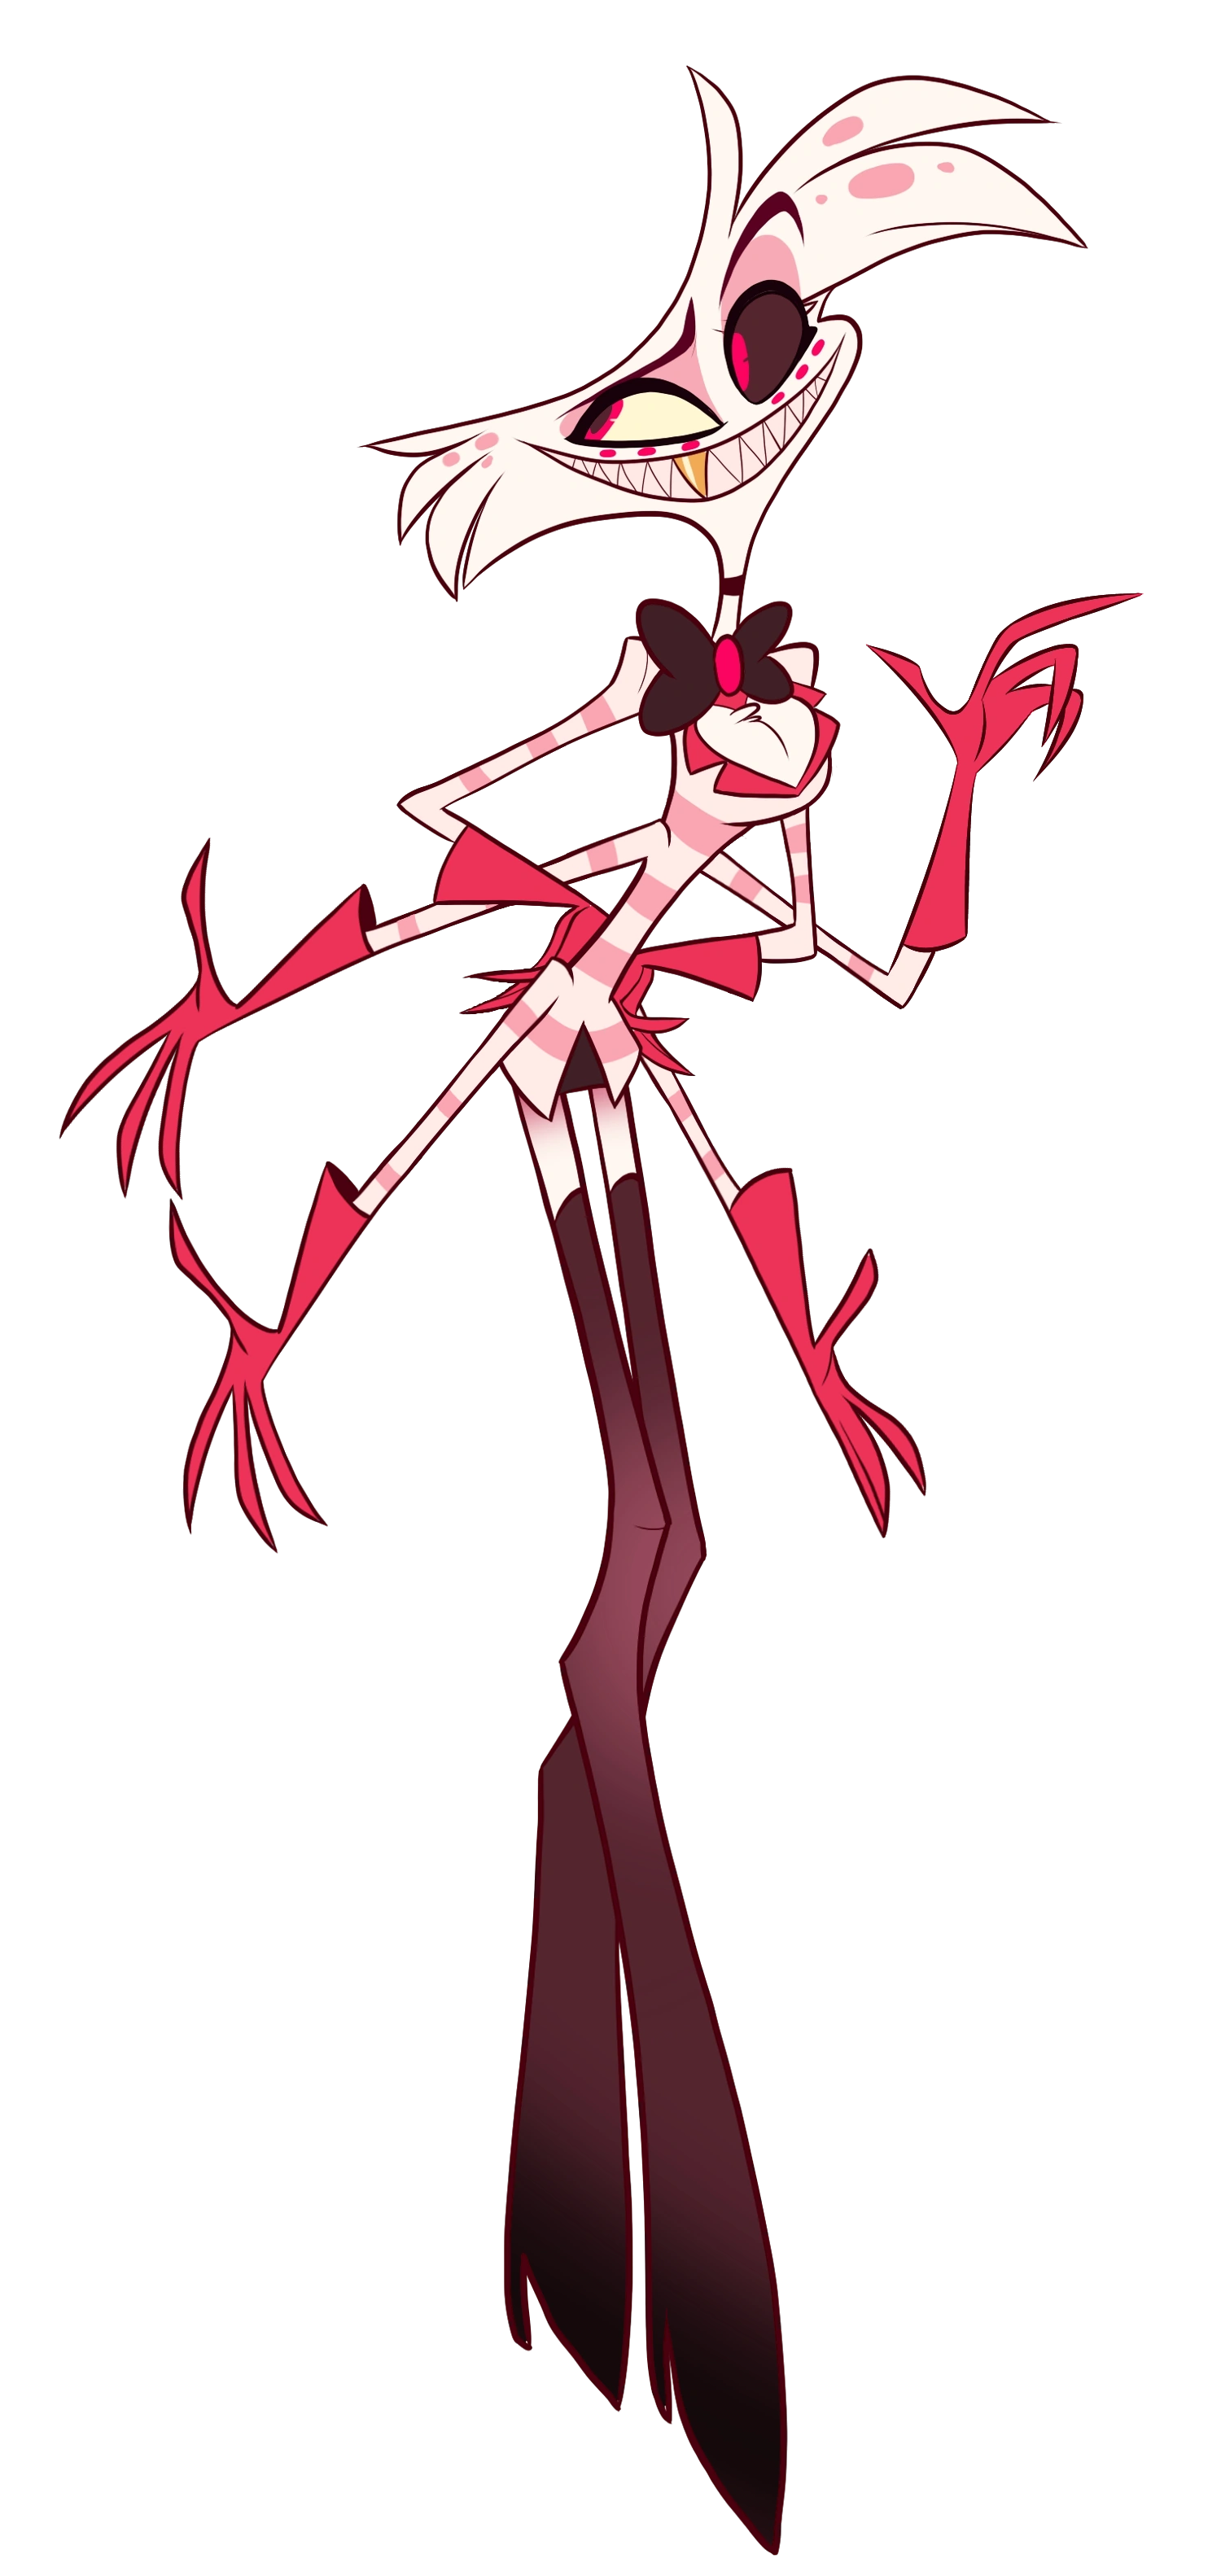 Hazbin Hotel Characters Hazbin Hotel Introduced Some Really Great Characters In Just Its First 